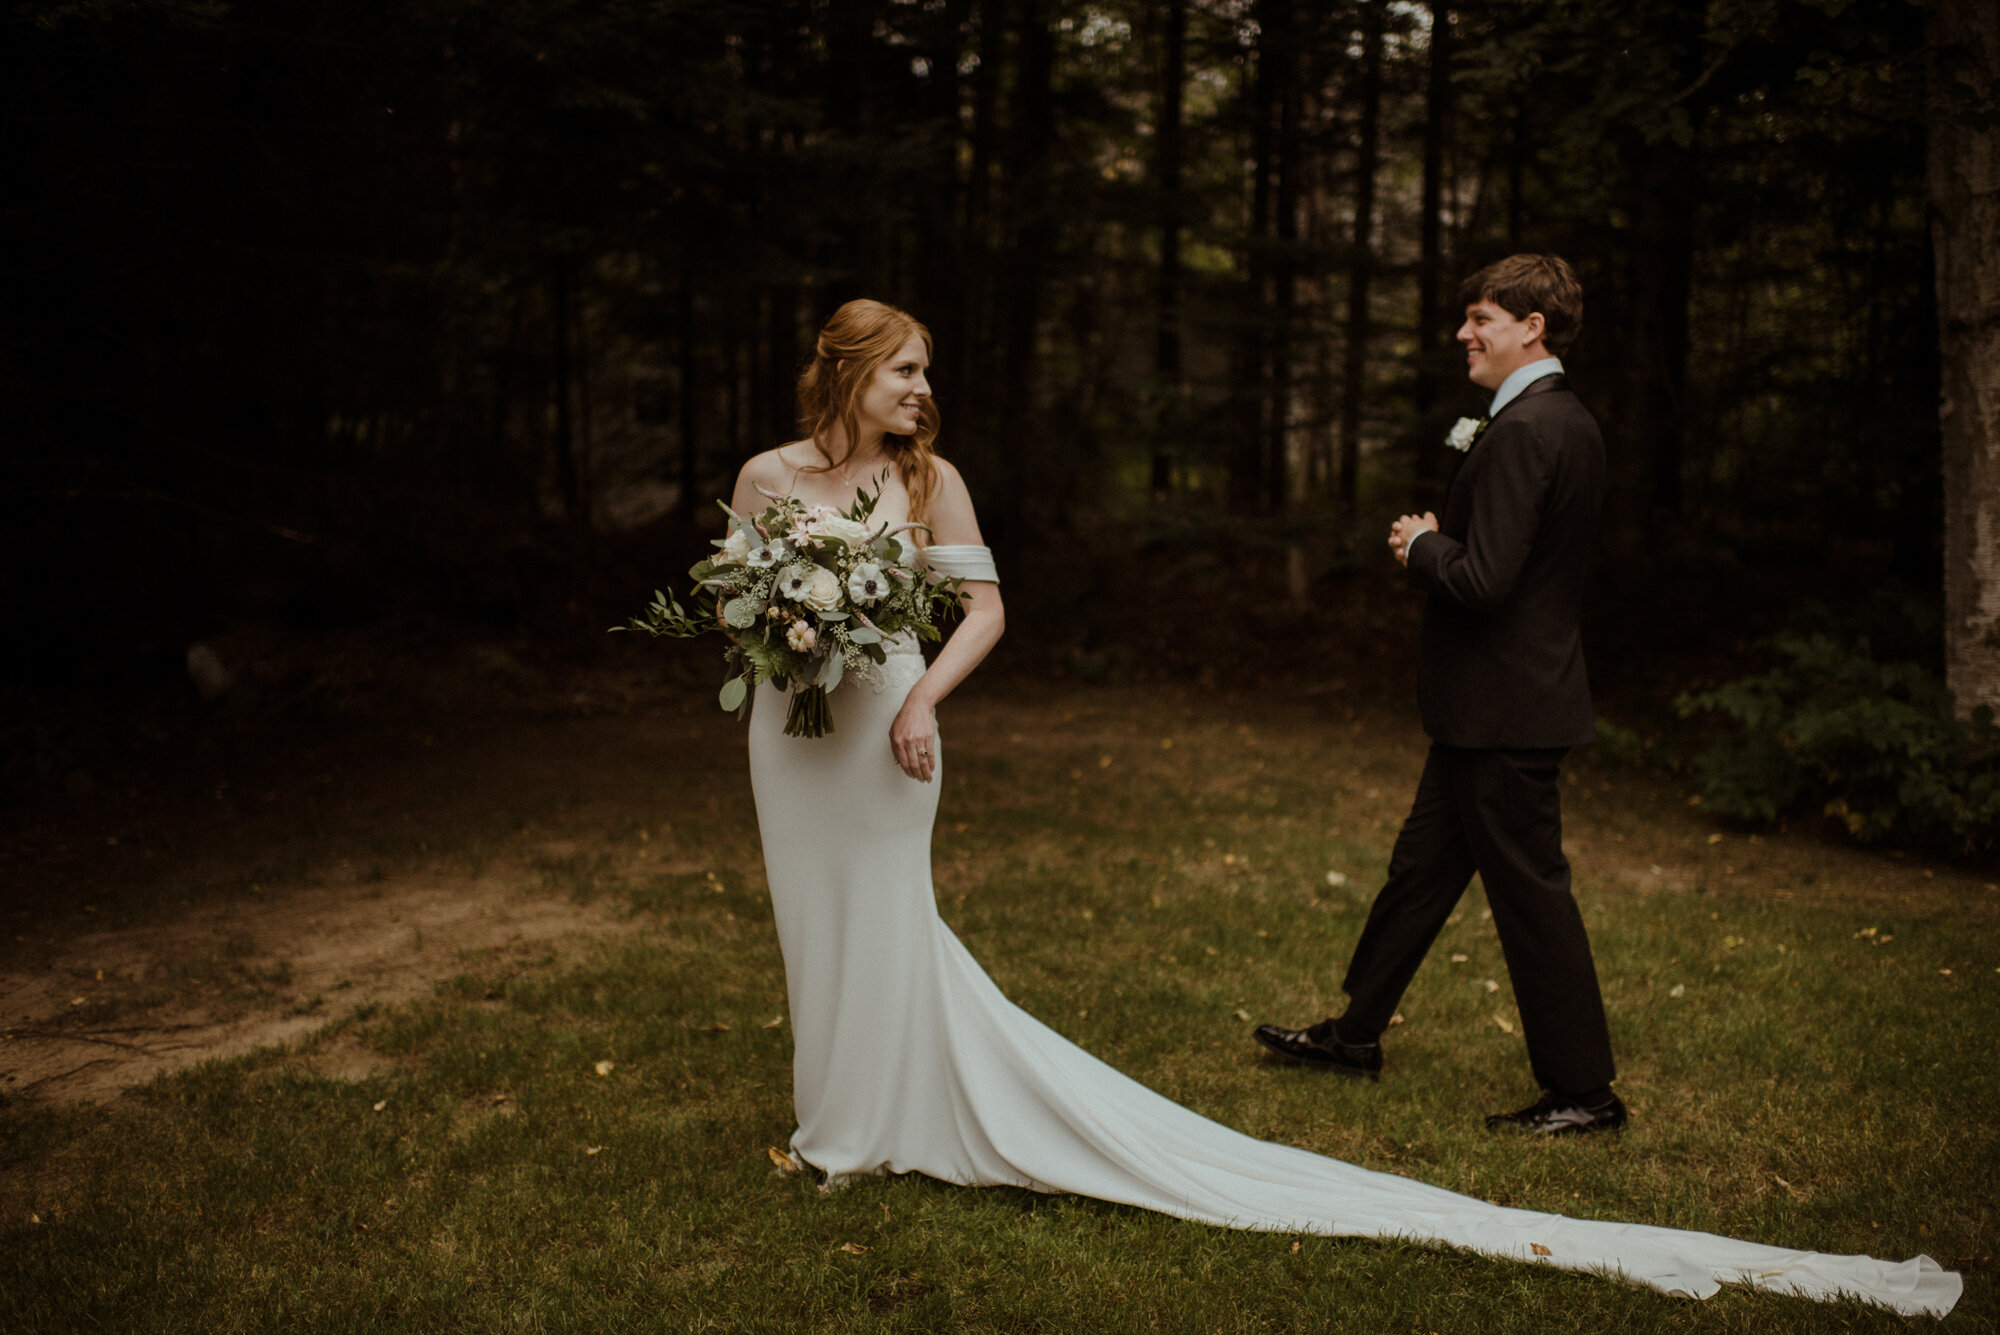 Autumn Elopement in New Hampshire - Backyard Wedding during COVID and Sunrise Hike in Wedding Dress - White Sails Creative_66.jpg